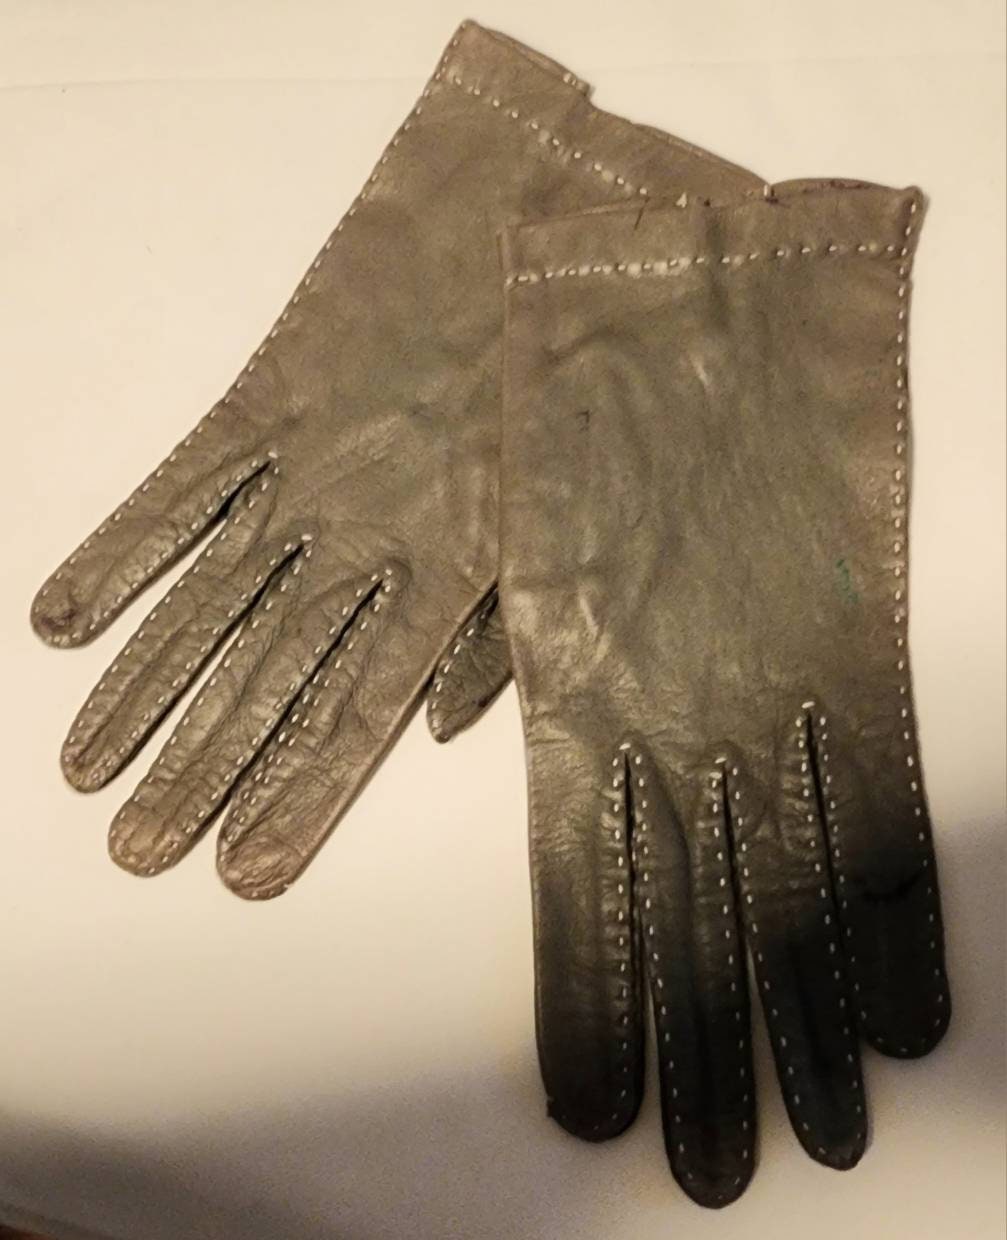 Vintage Leather Gloves 1950s 60s Thin Gray Green Leather Wrist Gloves Contrasting Stitching Mid Century Boho some marks